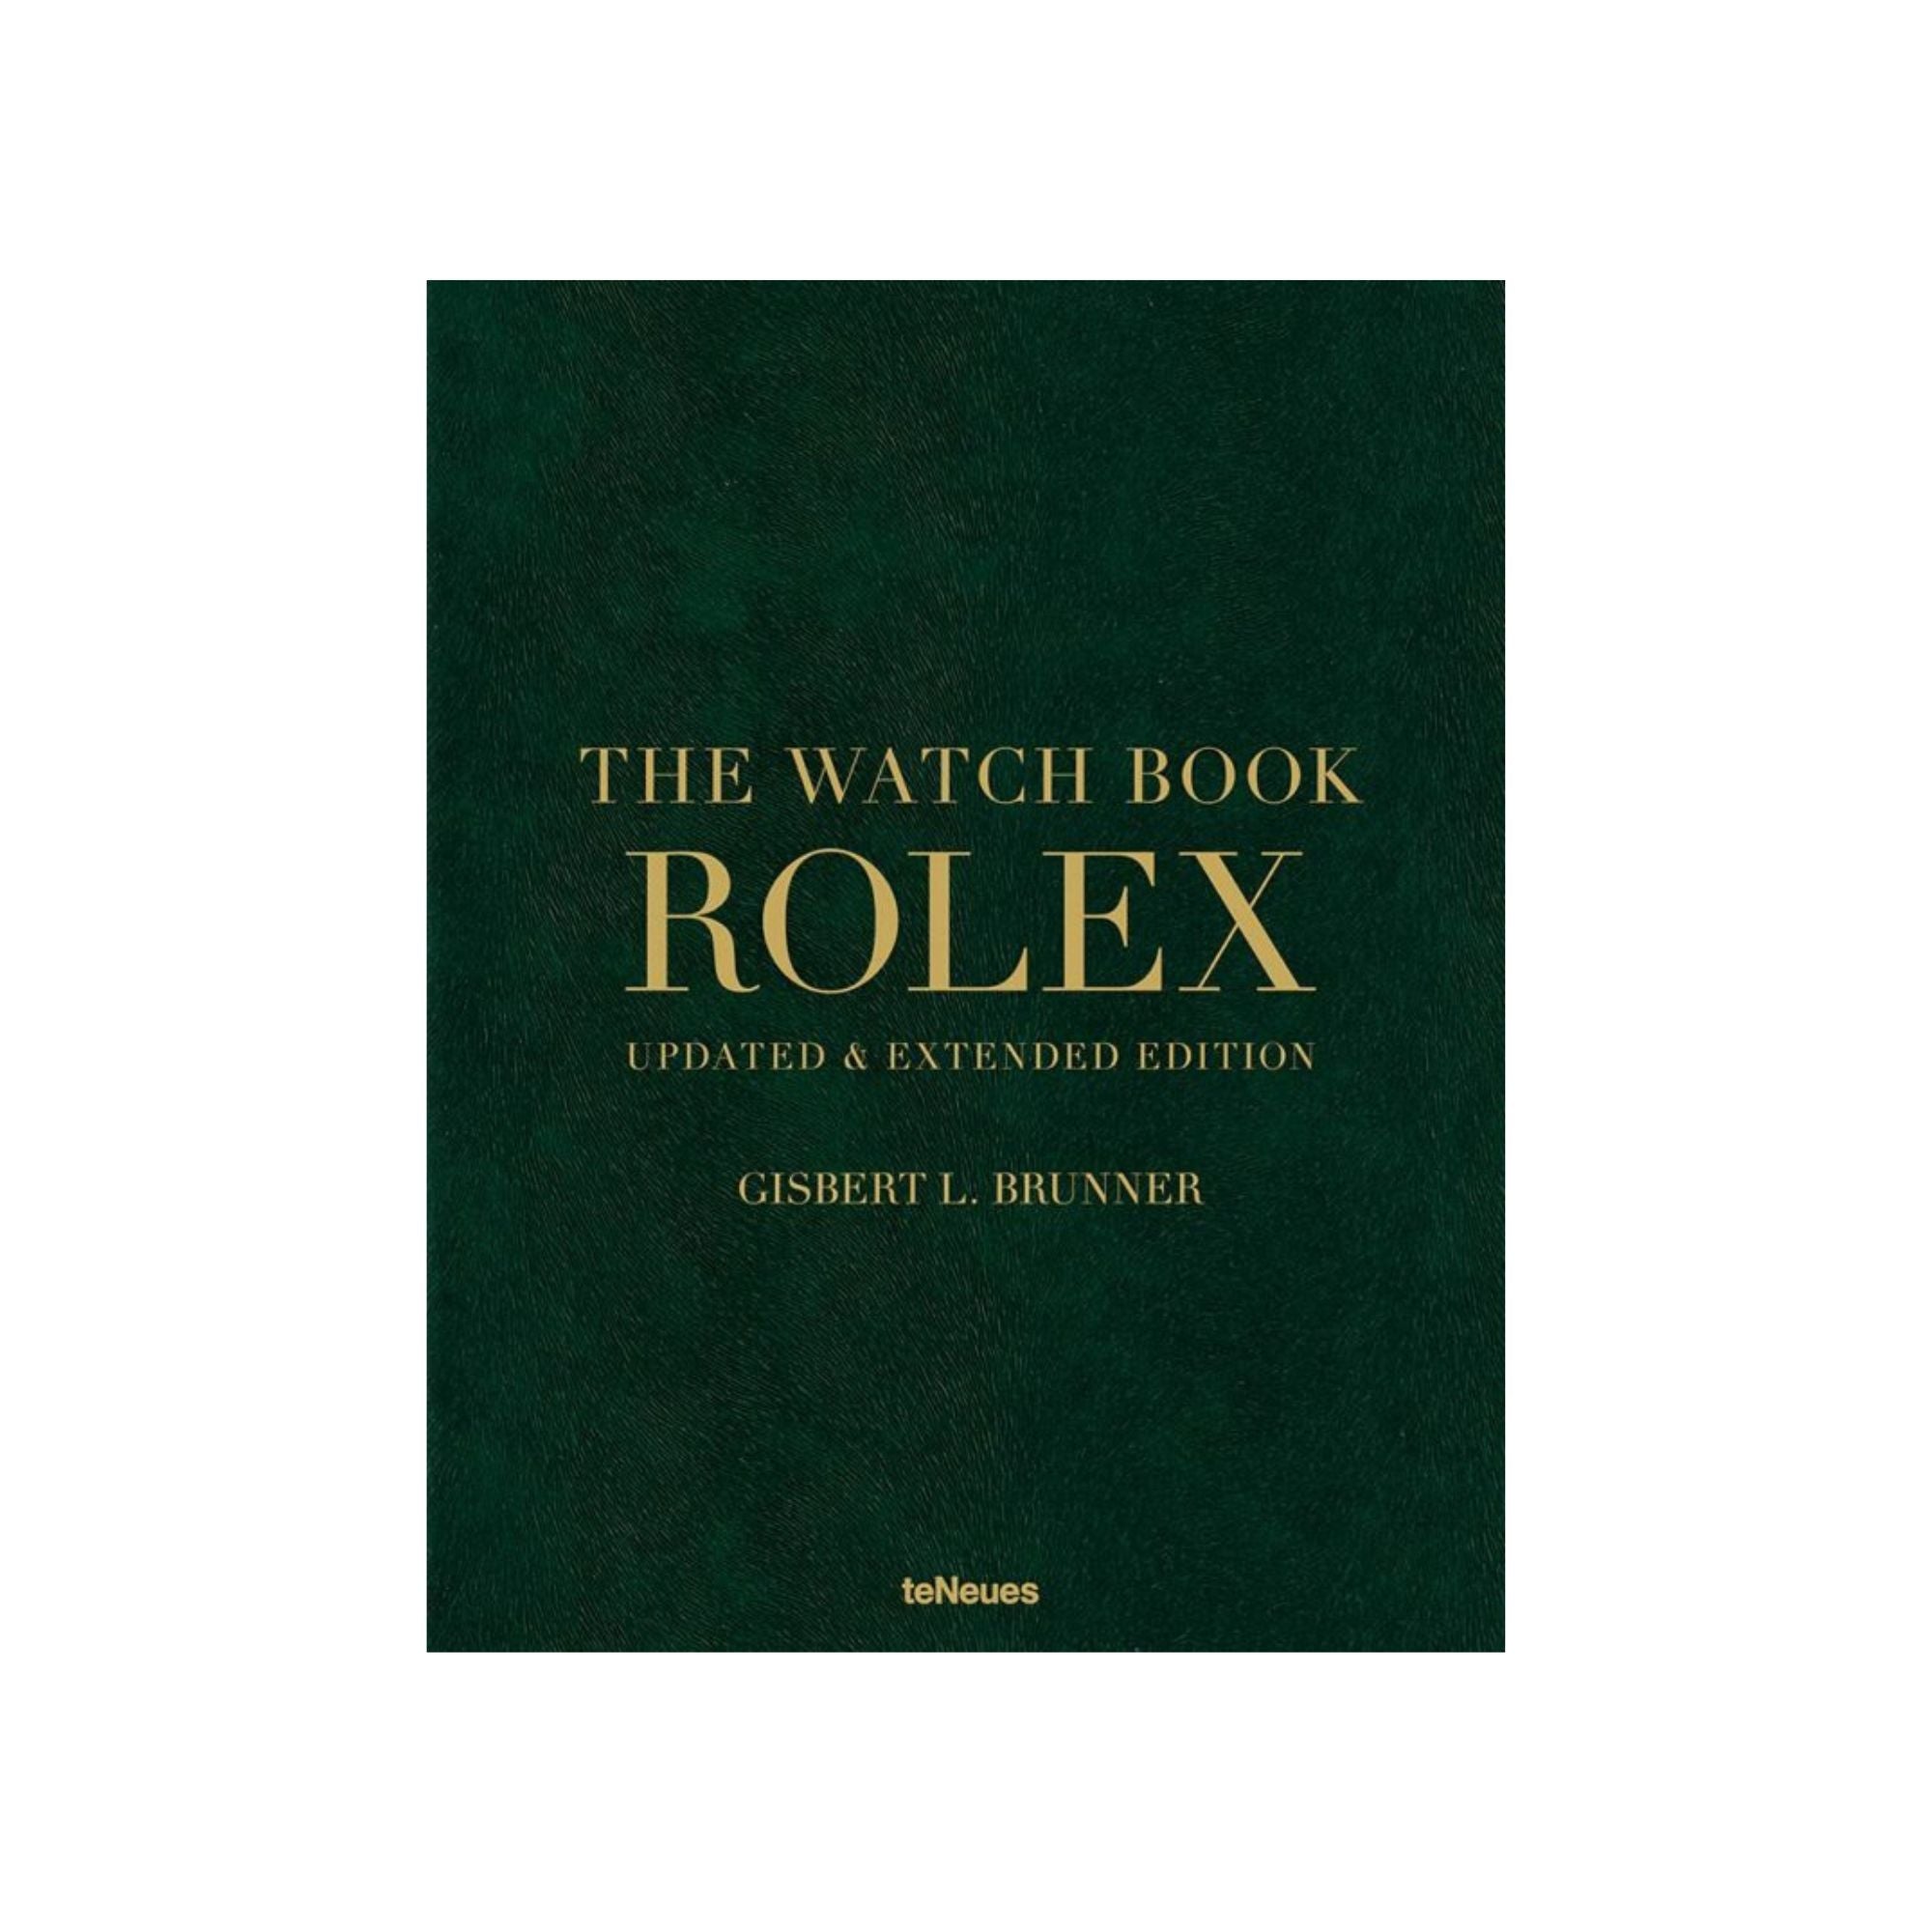 The Watch Book Rolex – New Edt. Book teNeues